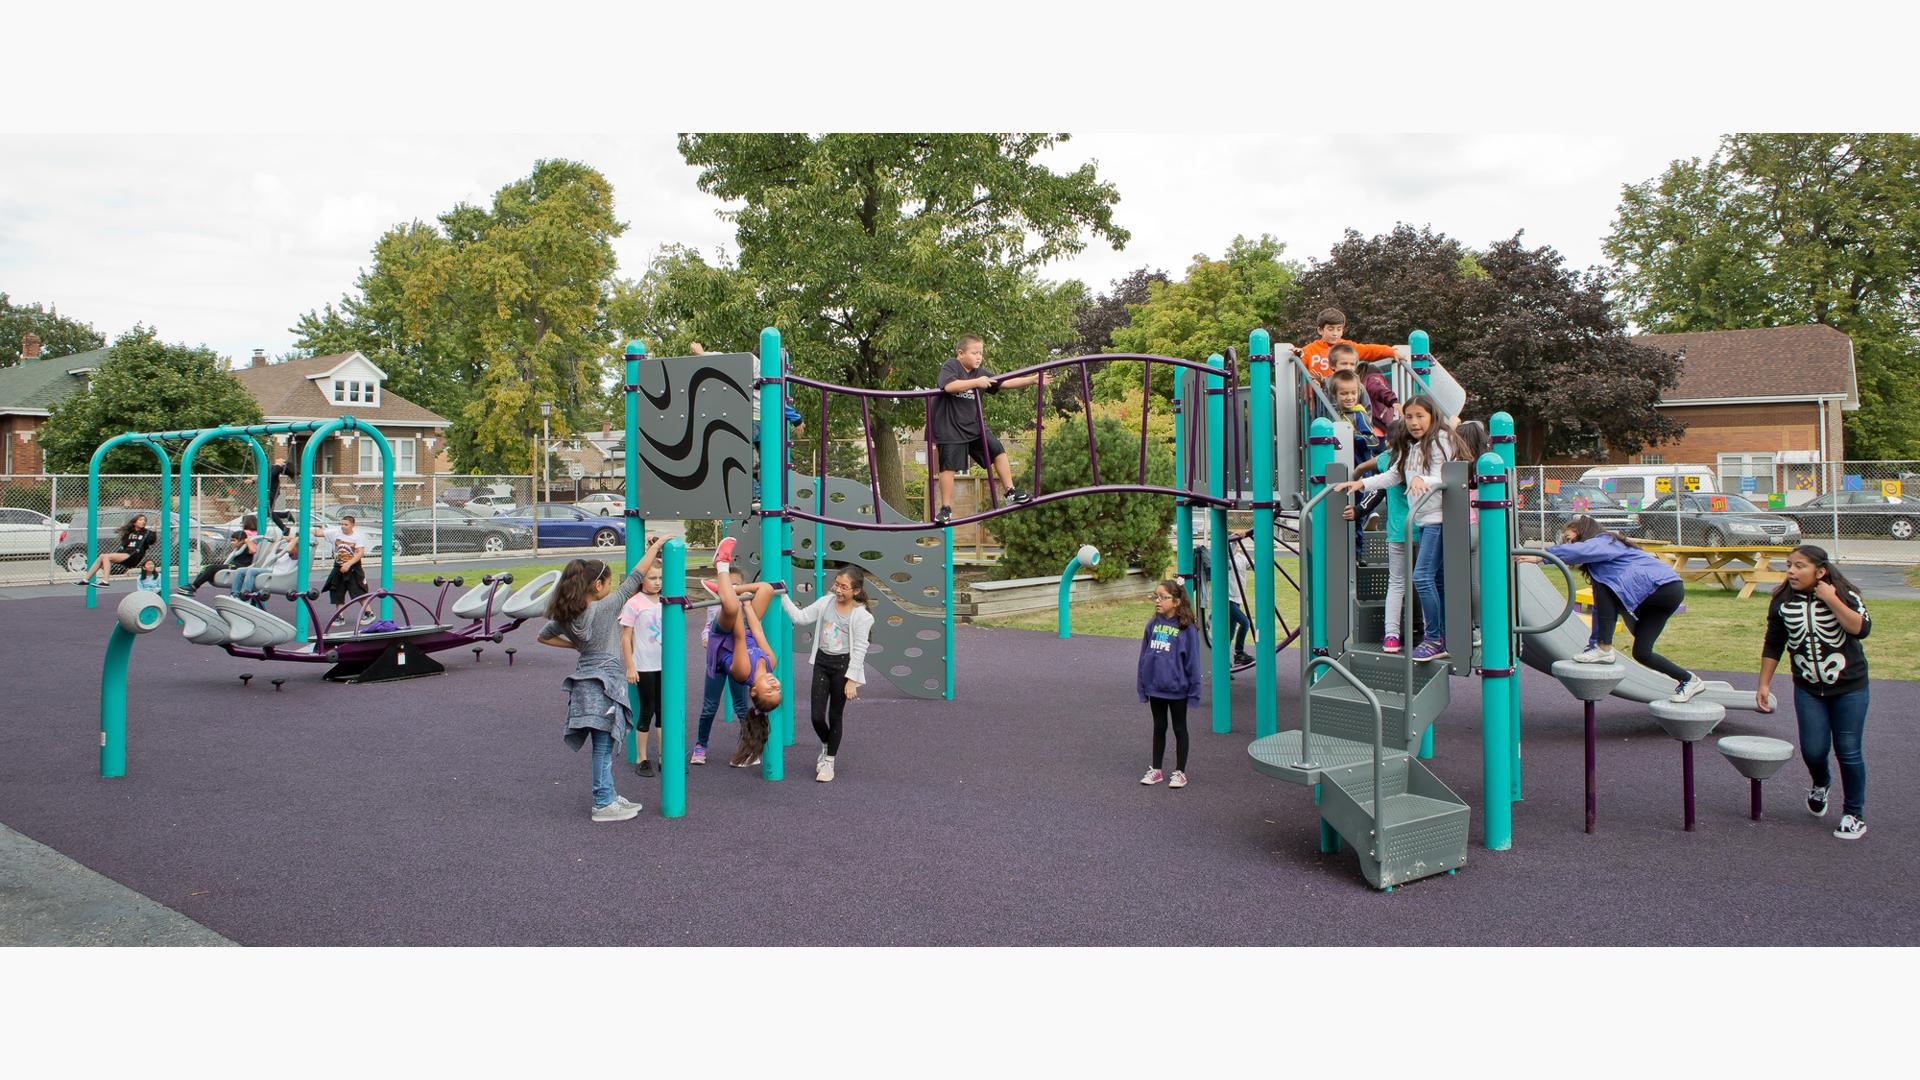 Komensky Elementary playground in Berwyn, IL, brought by KABOOM! features a Cascade Climber, a Canyon Climber, and a Double Swoosh Slide®. The PlayBooster® play structure also features freestanding play components like the We-Saw™, Saddle Spinners, Bobble Riders and swings. Best of all, the playground incorporates the school colors.